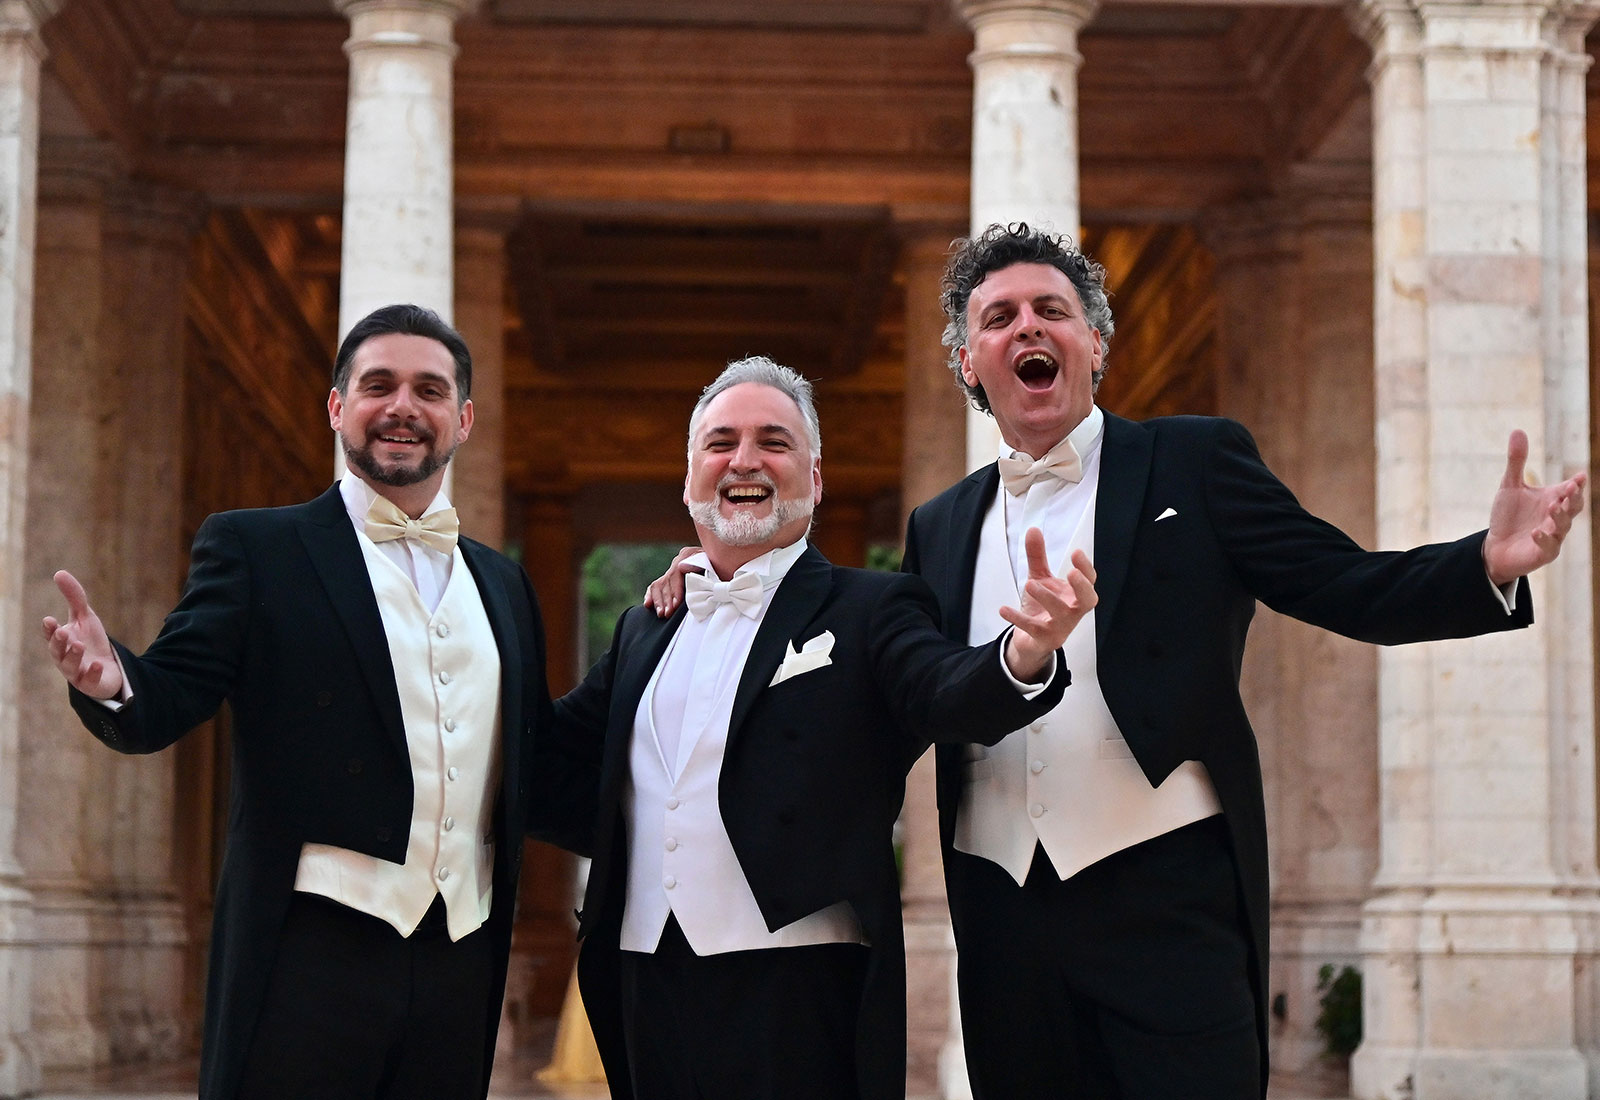 TRIBUTE TO THE 3 TENORS